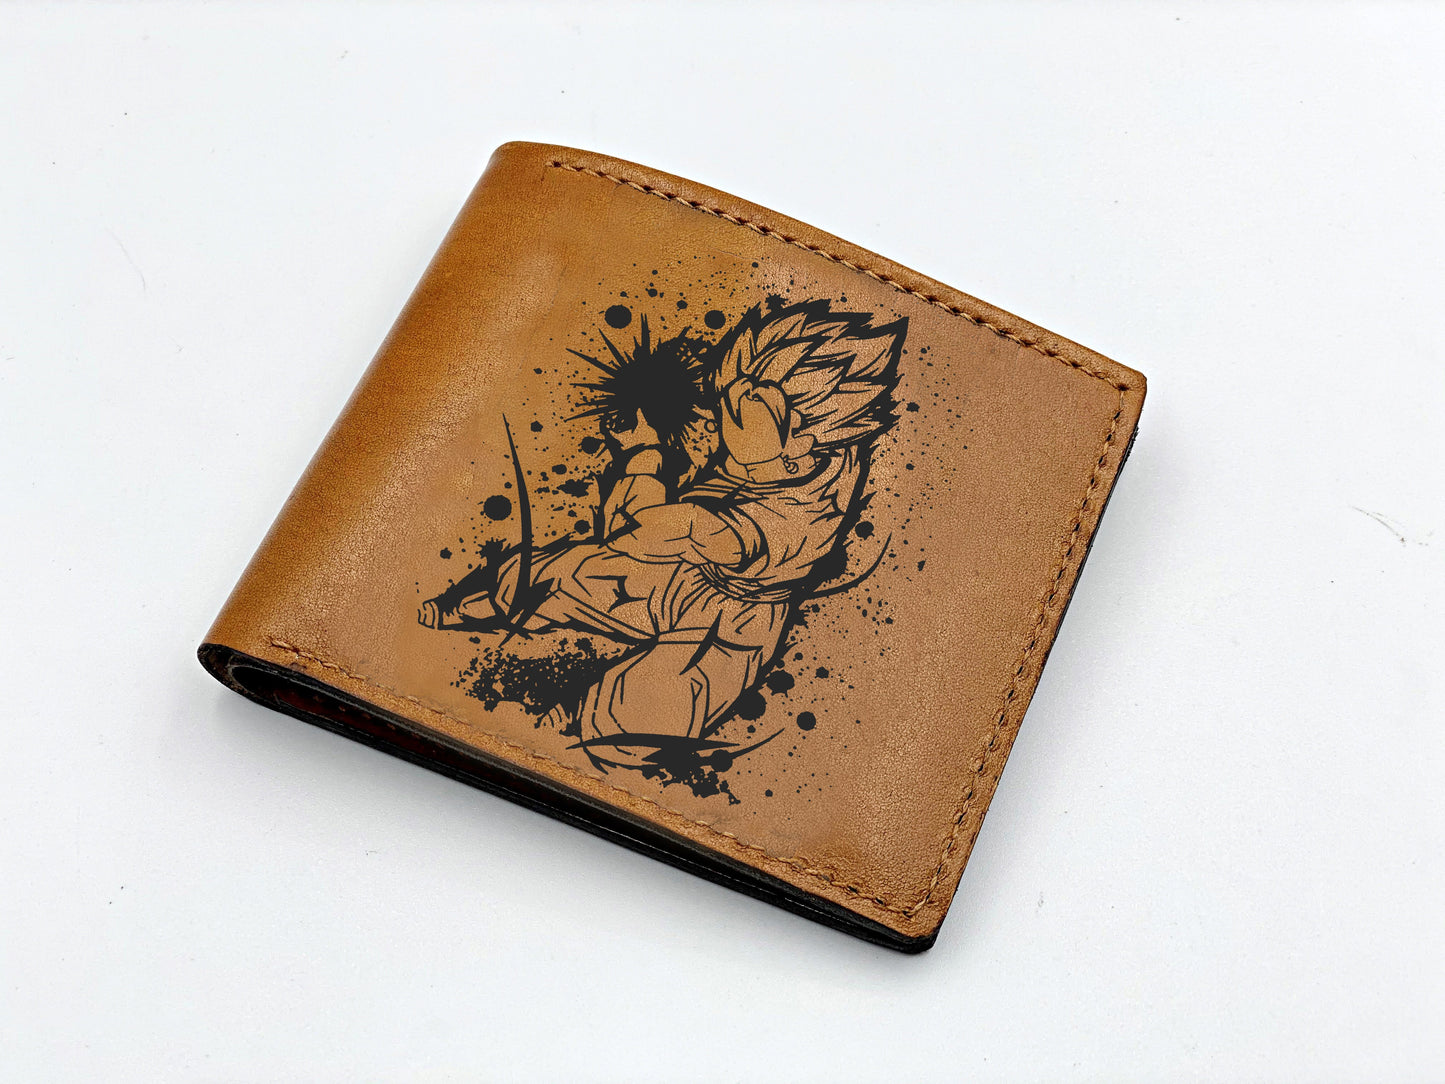 Mayan Corner - Customized leather handmade wallet, Cell dragon ball leather gift, dragon ball characters art wallet